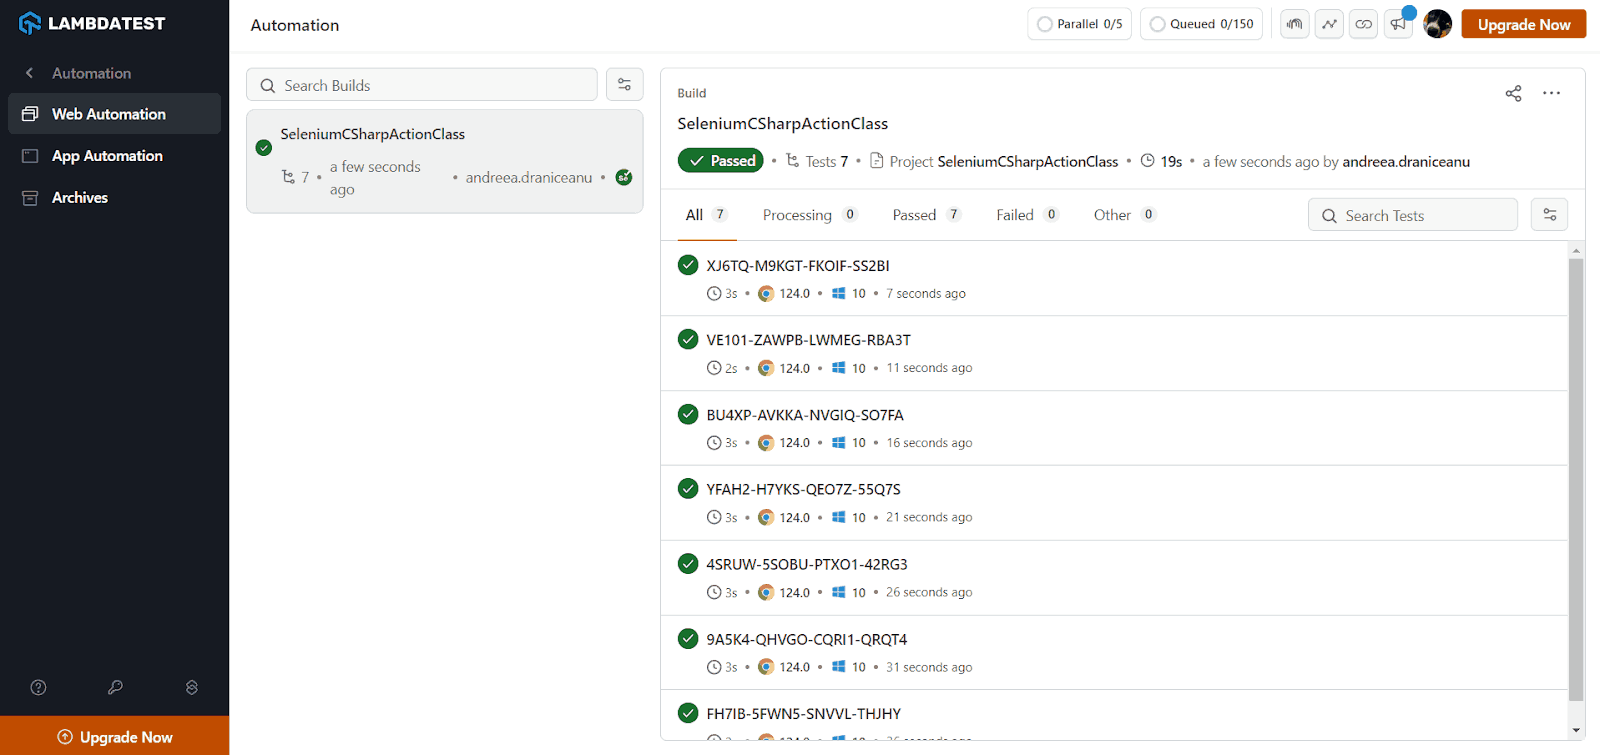 Screenshot of results displayed in LambdaTest Automation Dashboard under Web Automation section